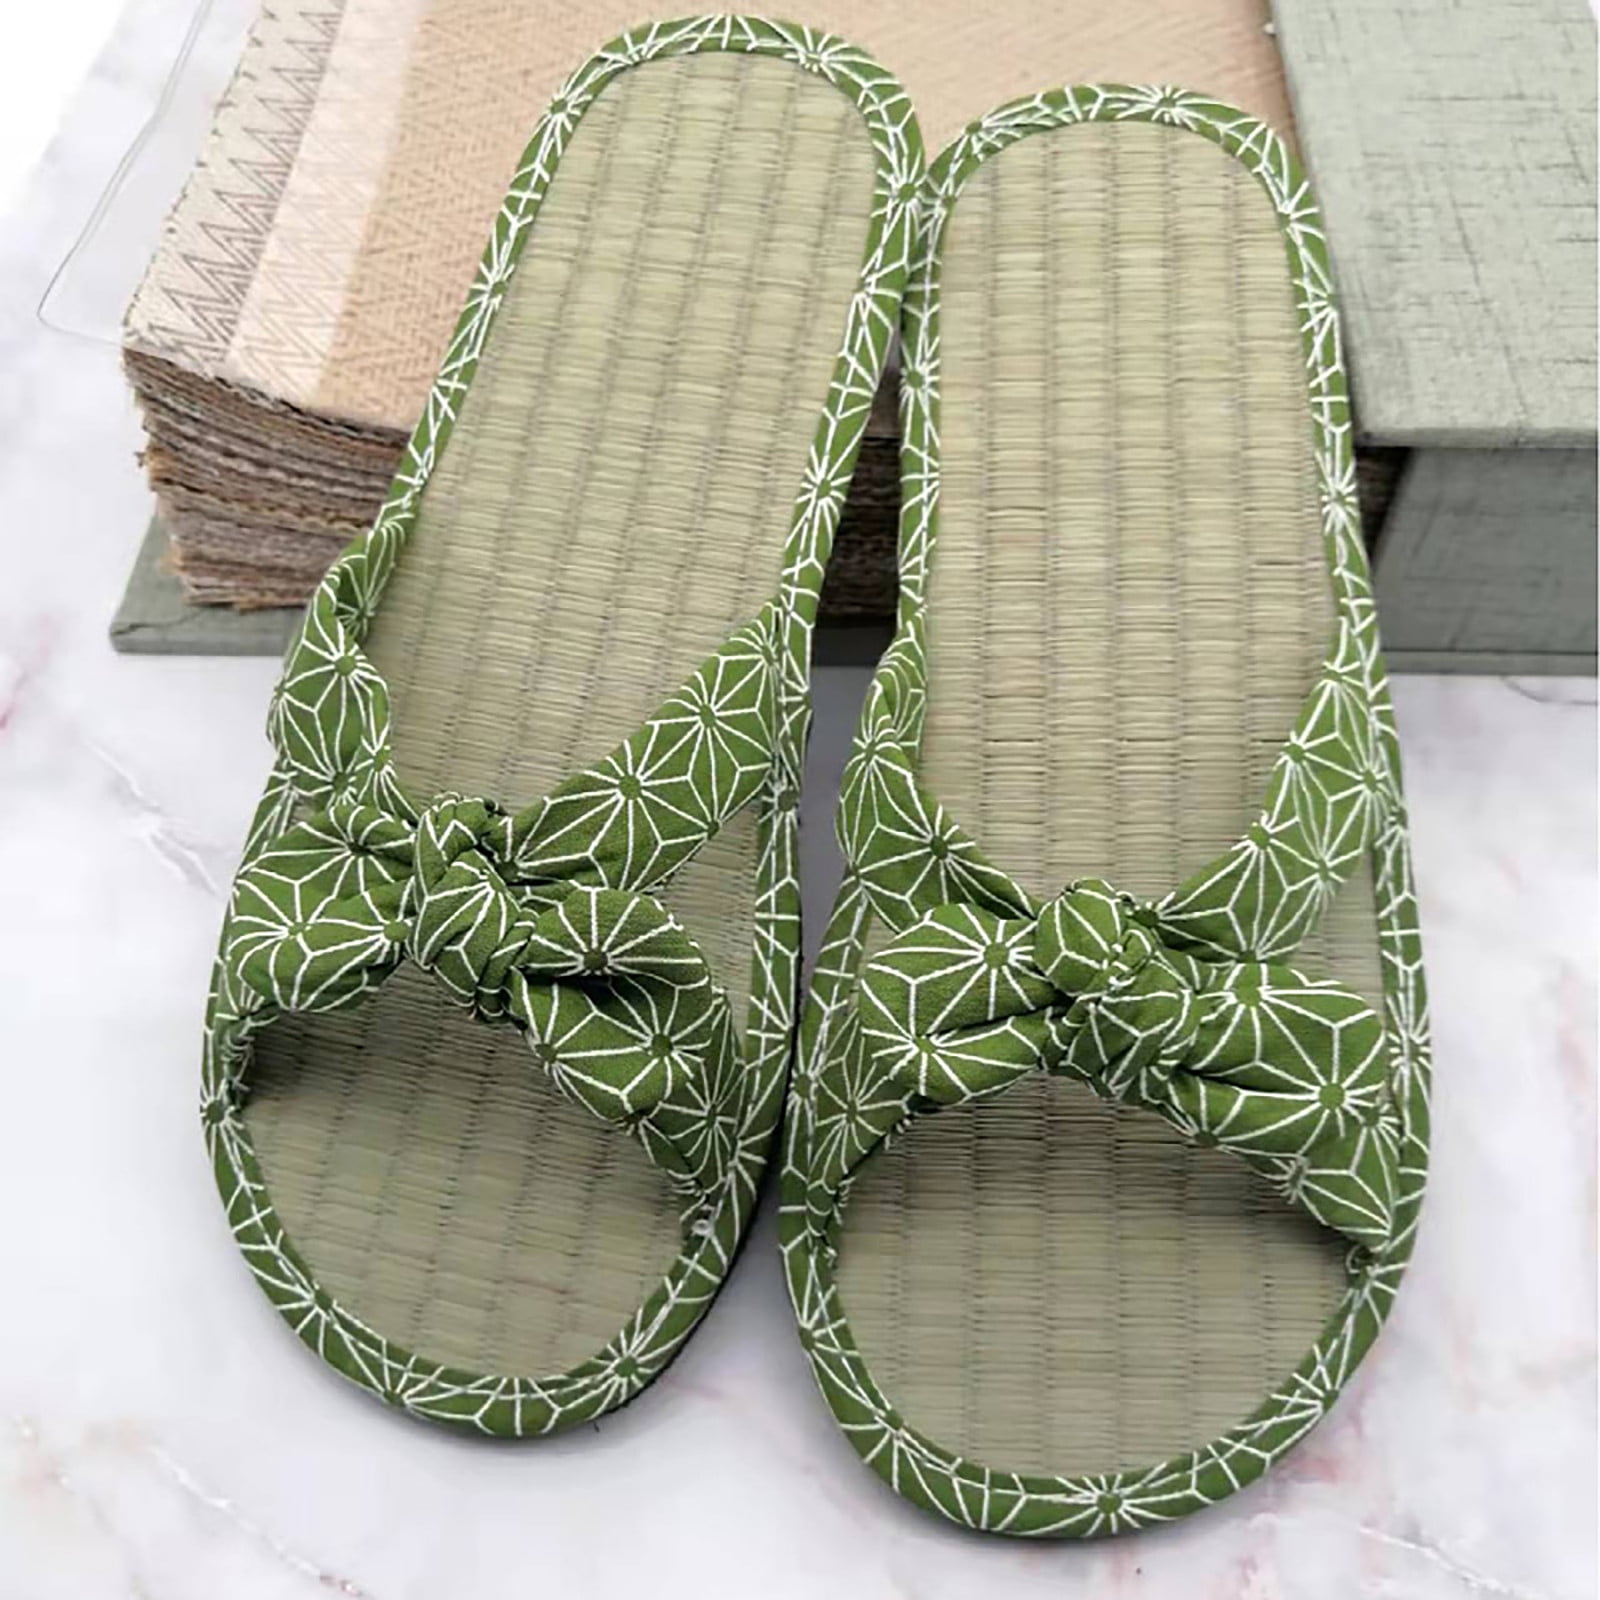 Ladies Straw Mat Slippers Casual Bow Rattan Grass Slippers Home